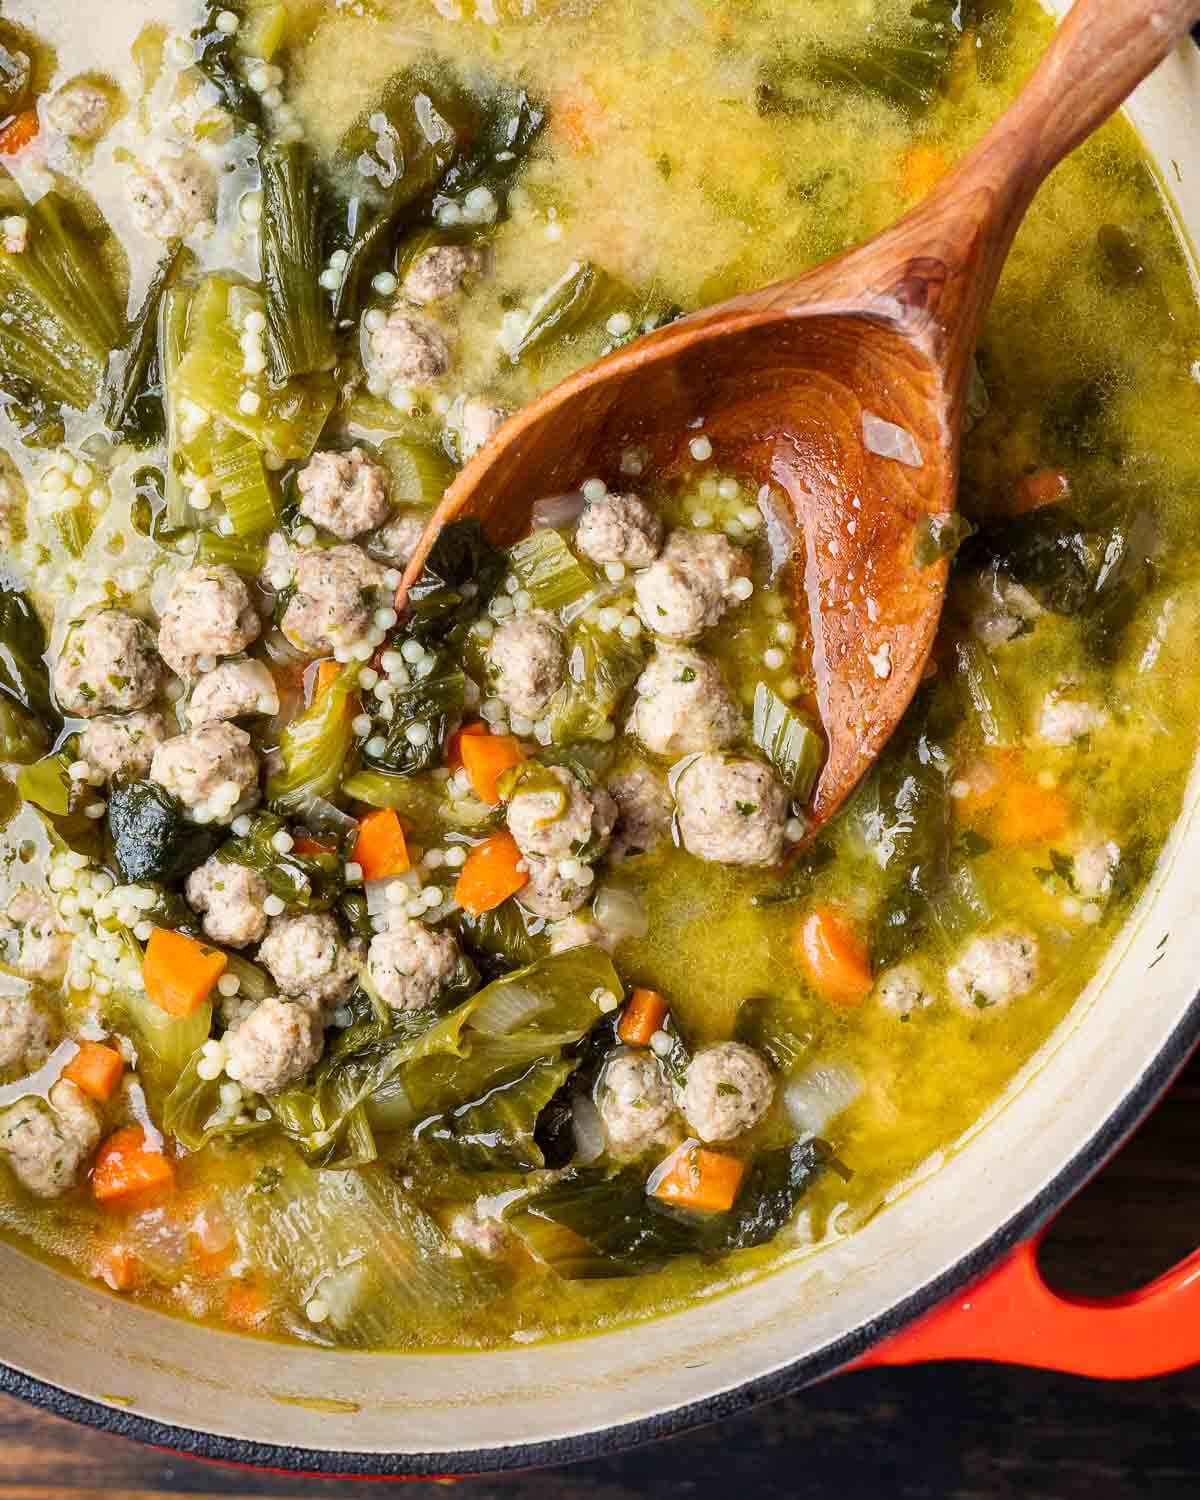 Large pot of Italian wedding soup with wooden ladle scooping out the meatballs.